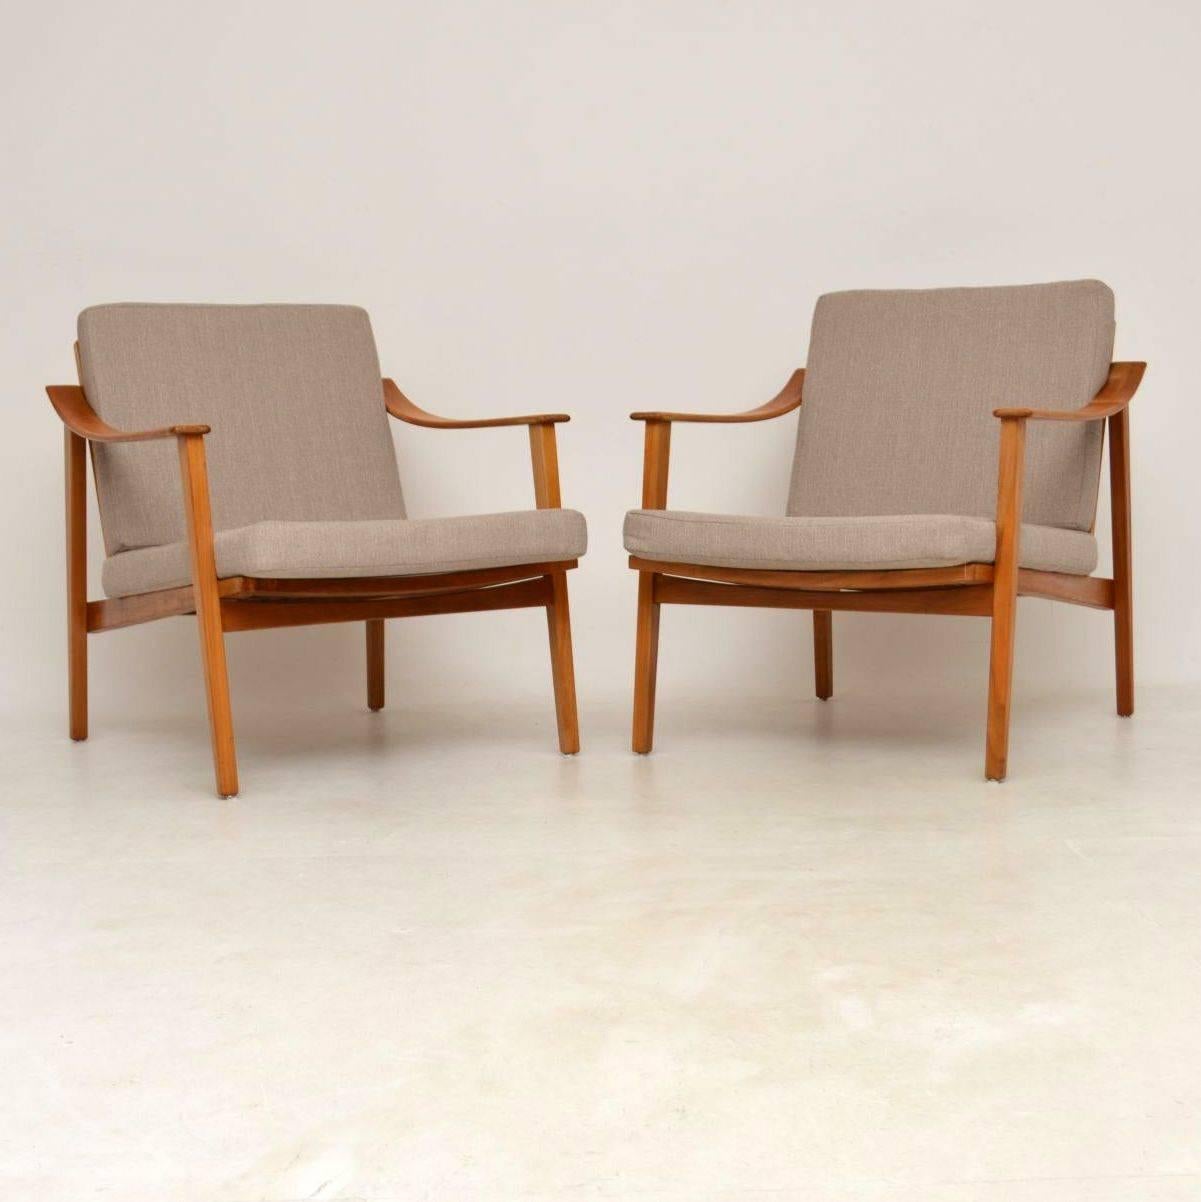 A very stylish pair of vintage armchairs, these were made in Denmark and date from the 1950s-1960s. The frames are solid wood that looks like satin or cherrywood. The frames are clean, study and sound, with only some extremely minor wear. The